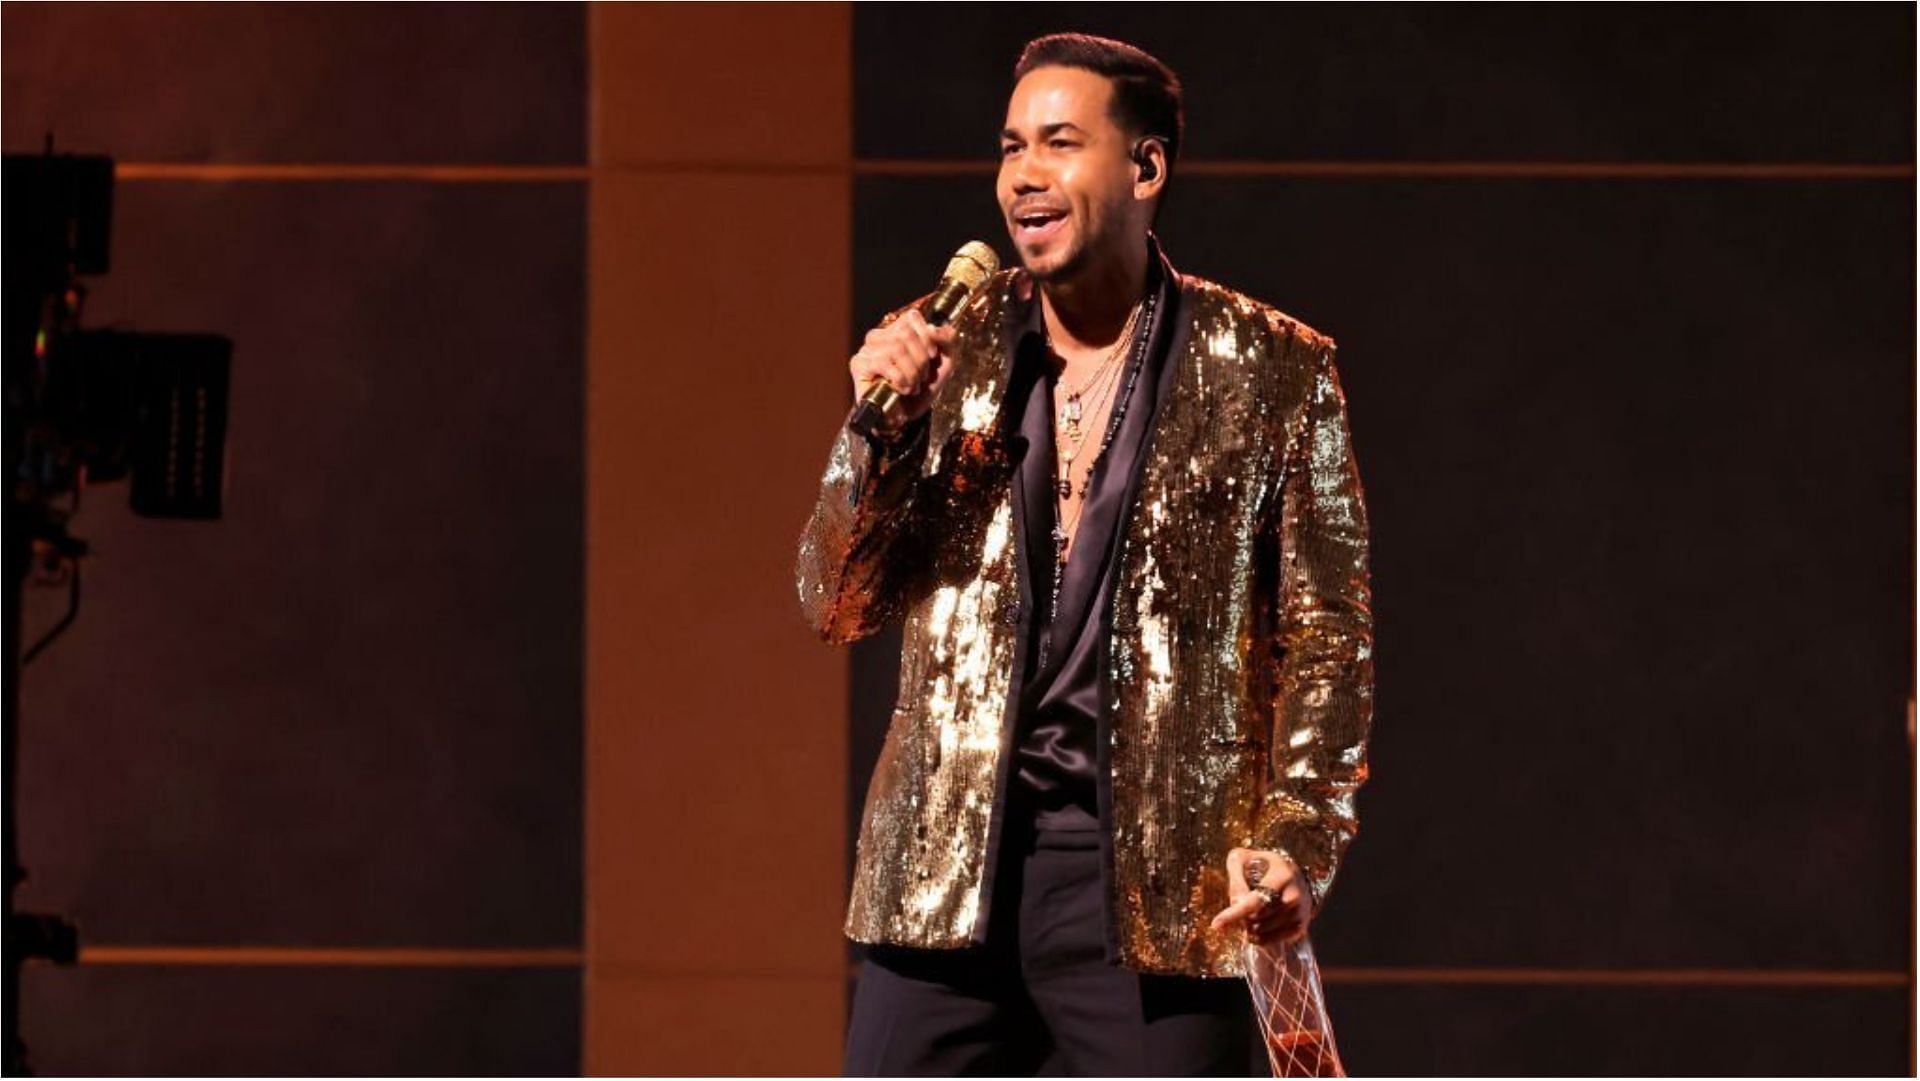 Romeo Santos has revealed in a music video that he is becoming the father of a fourth child (Image via Kevin Winter/Getty Images)